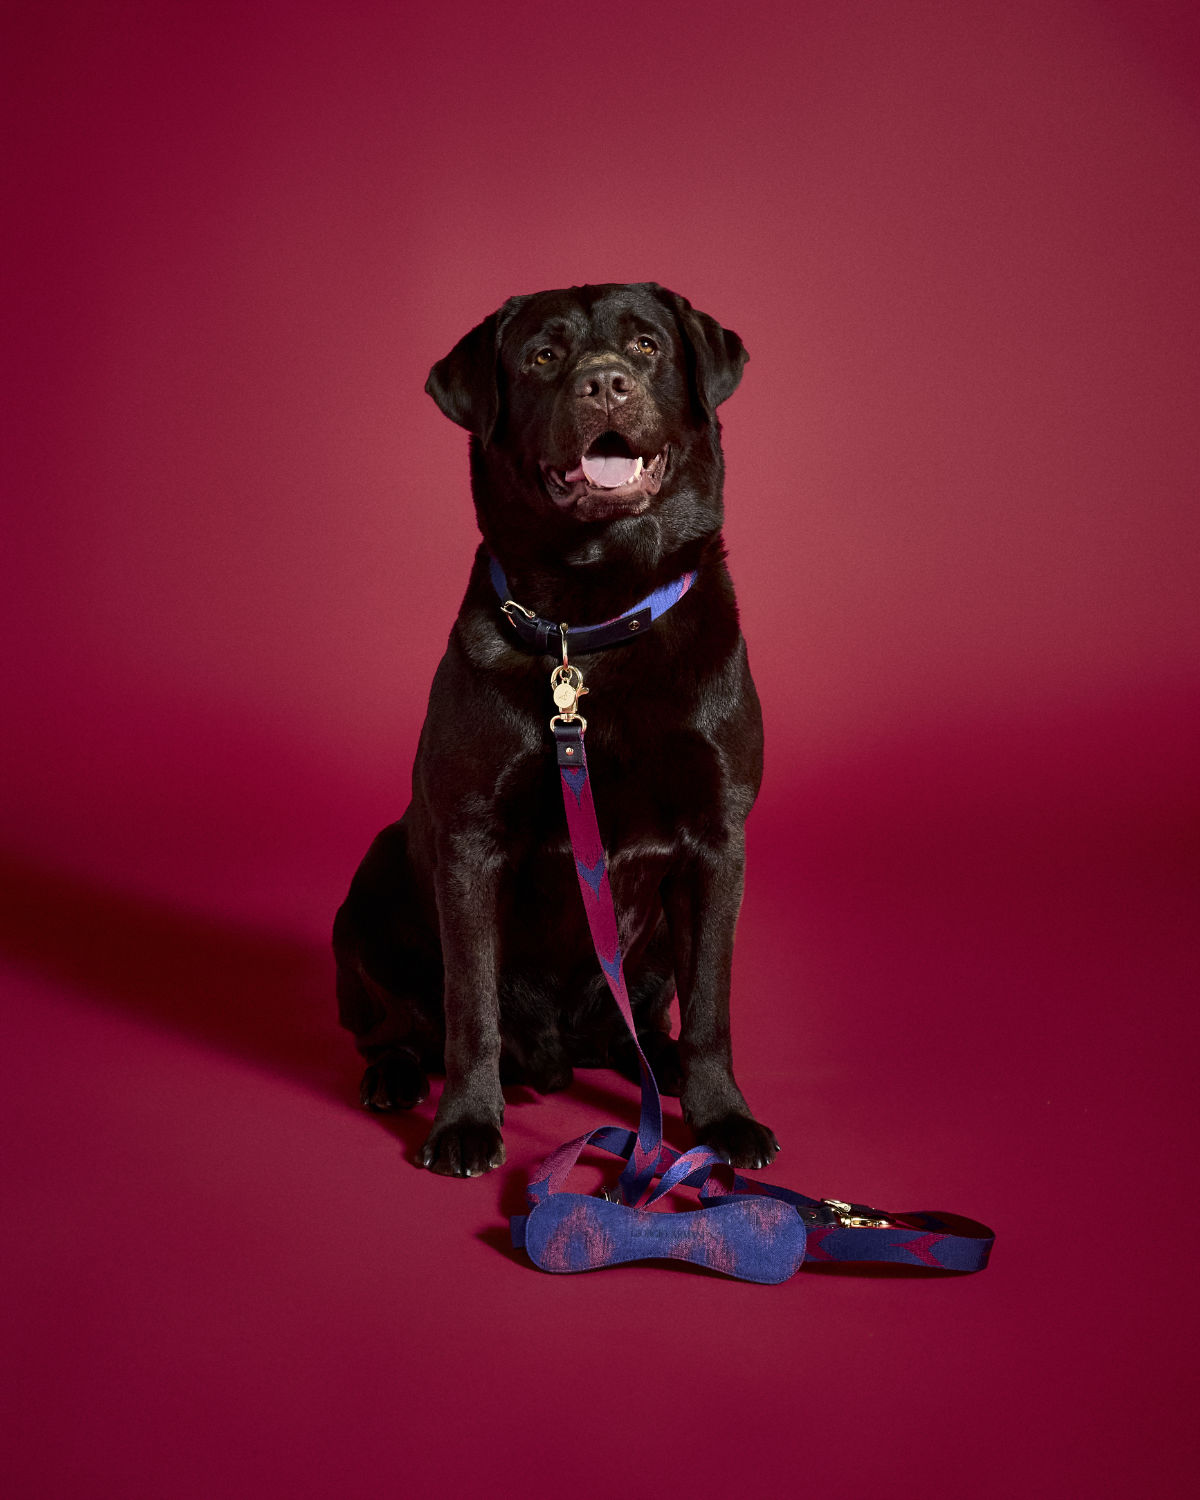 Giorgio Armani X Poldo Dog Couture: New Collection Of Clothing And Accessories For Dogs